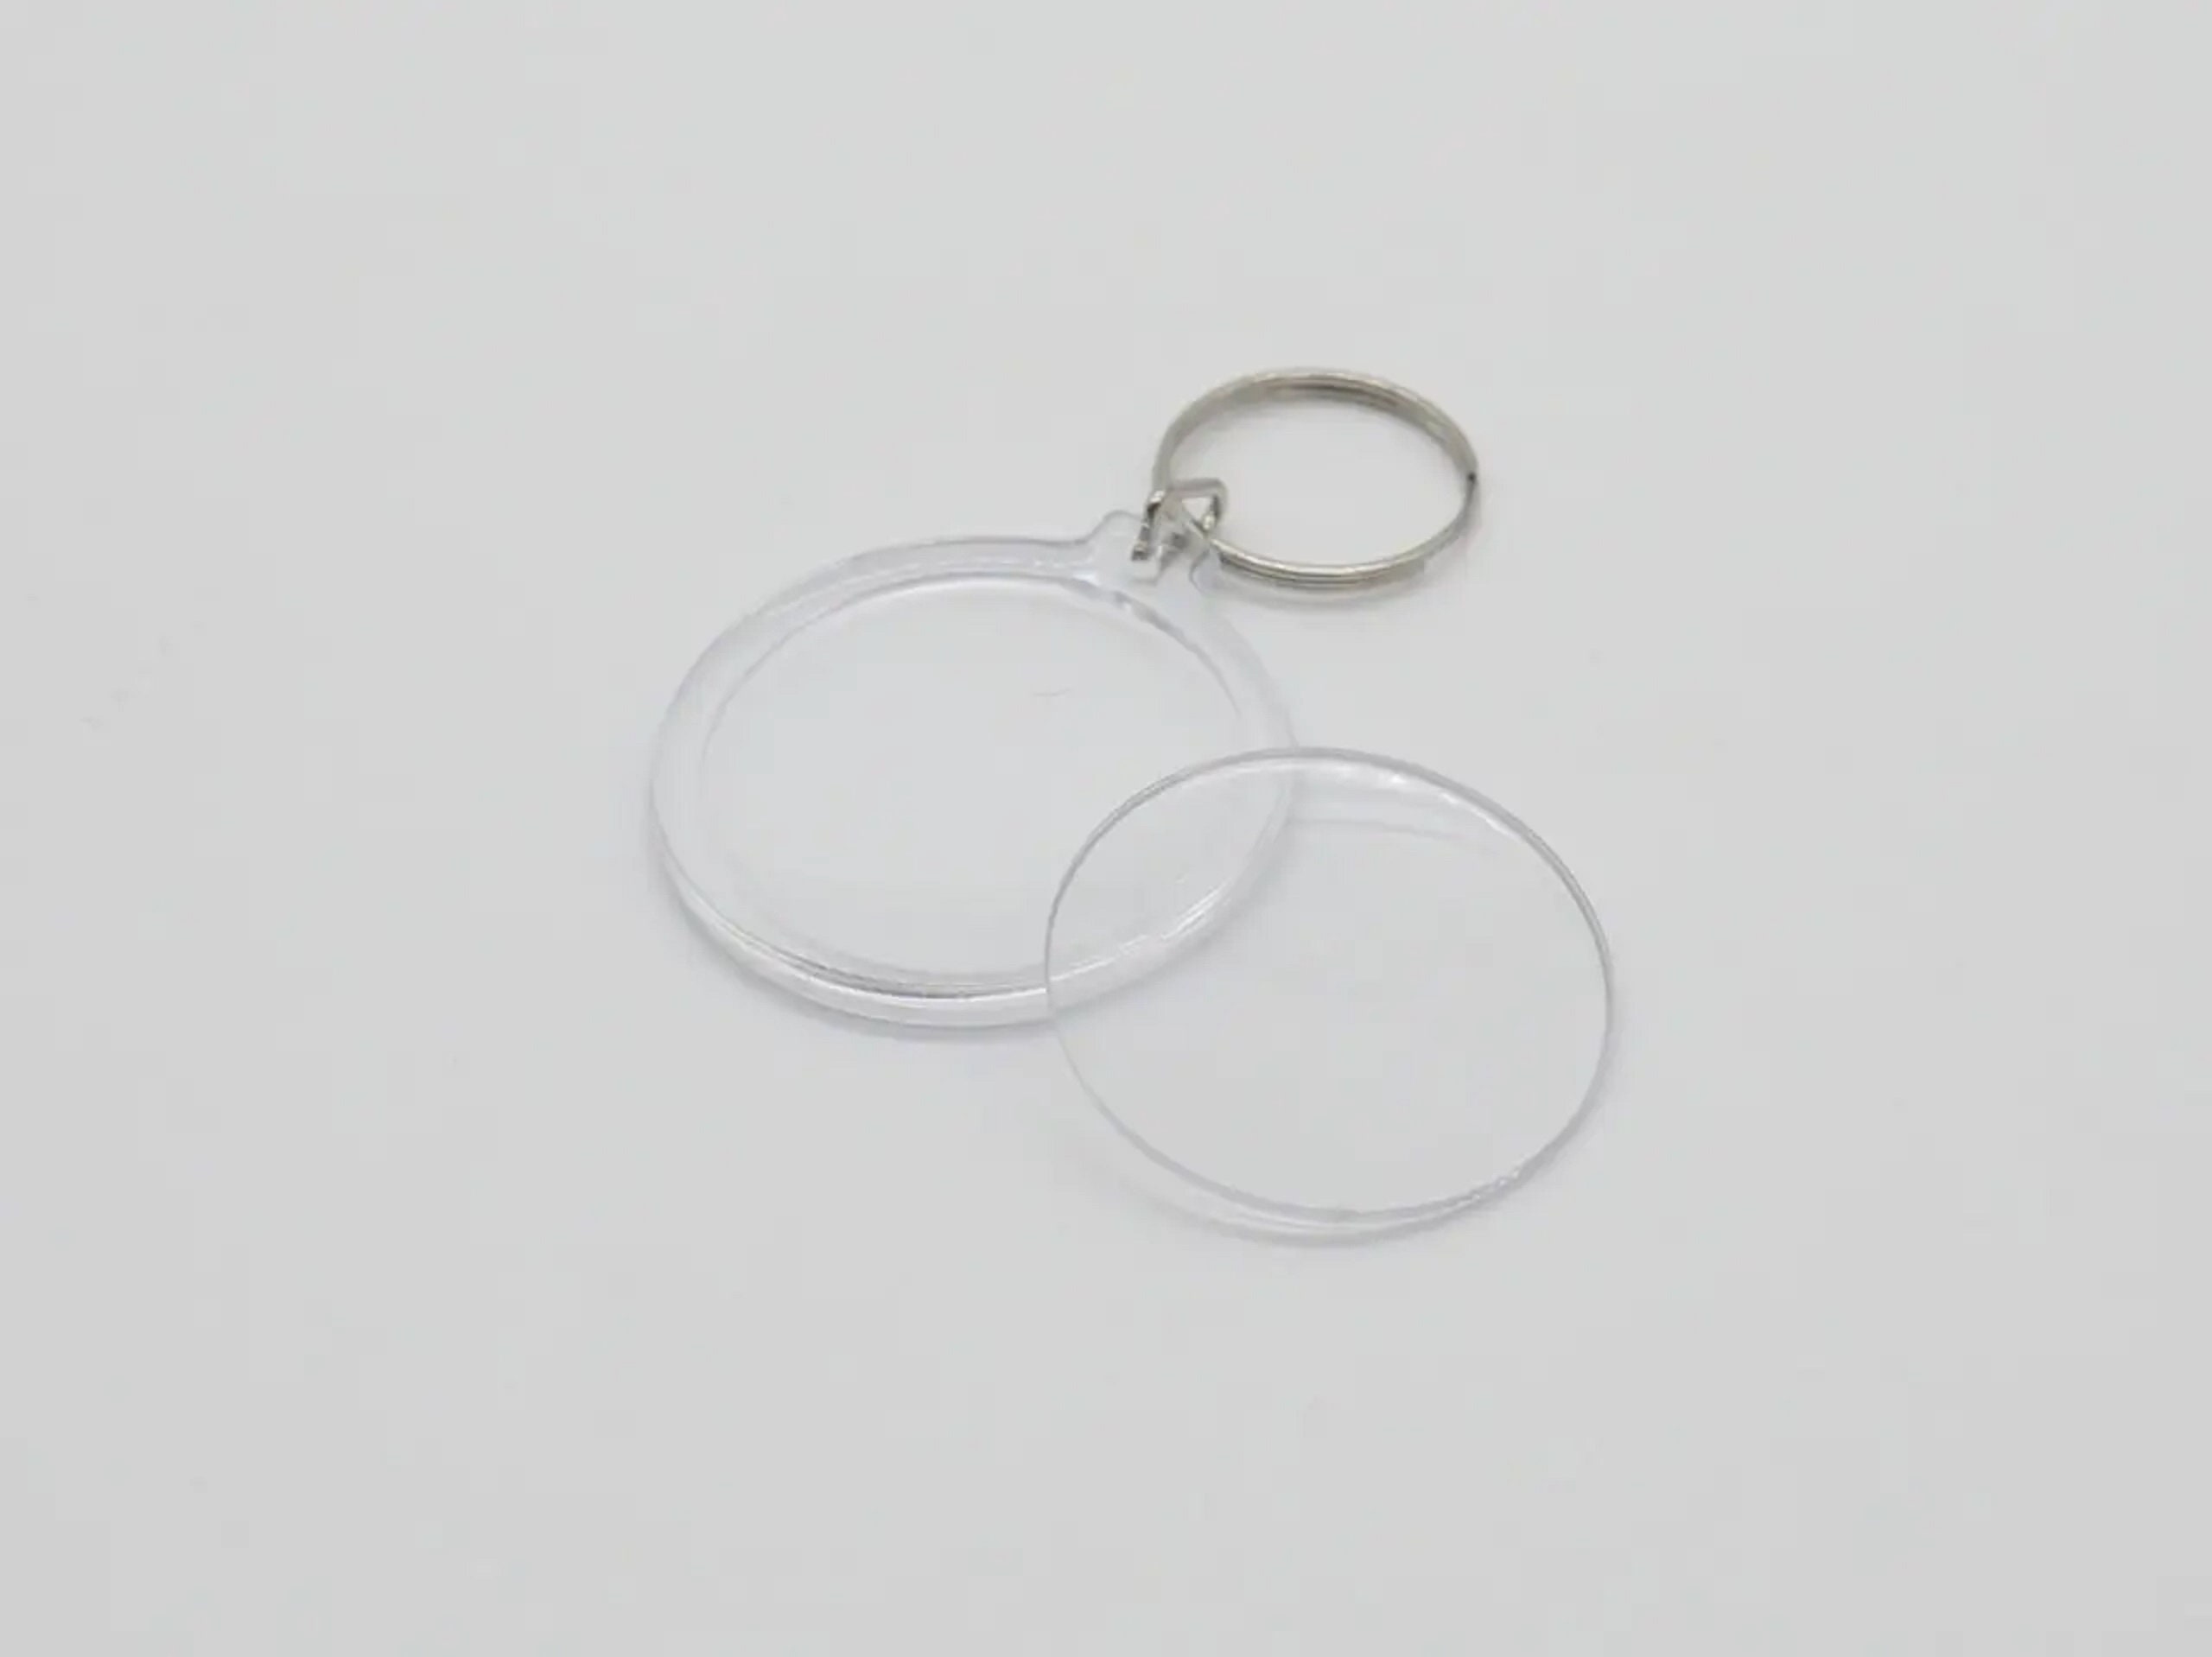 Clear Round Acrylic Blanks Keychain Set, 5/10 Keyring Chains/faux